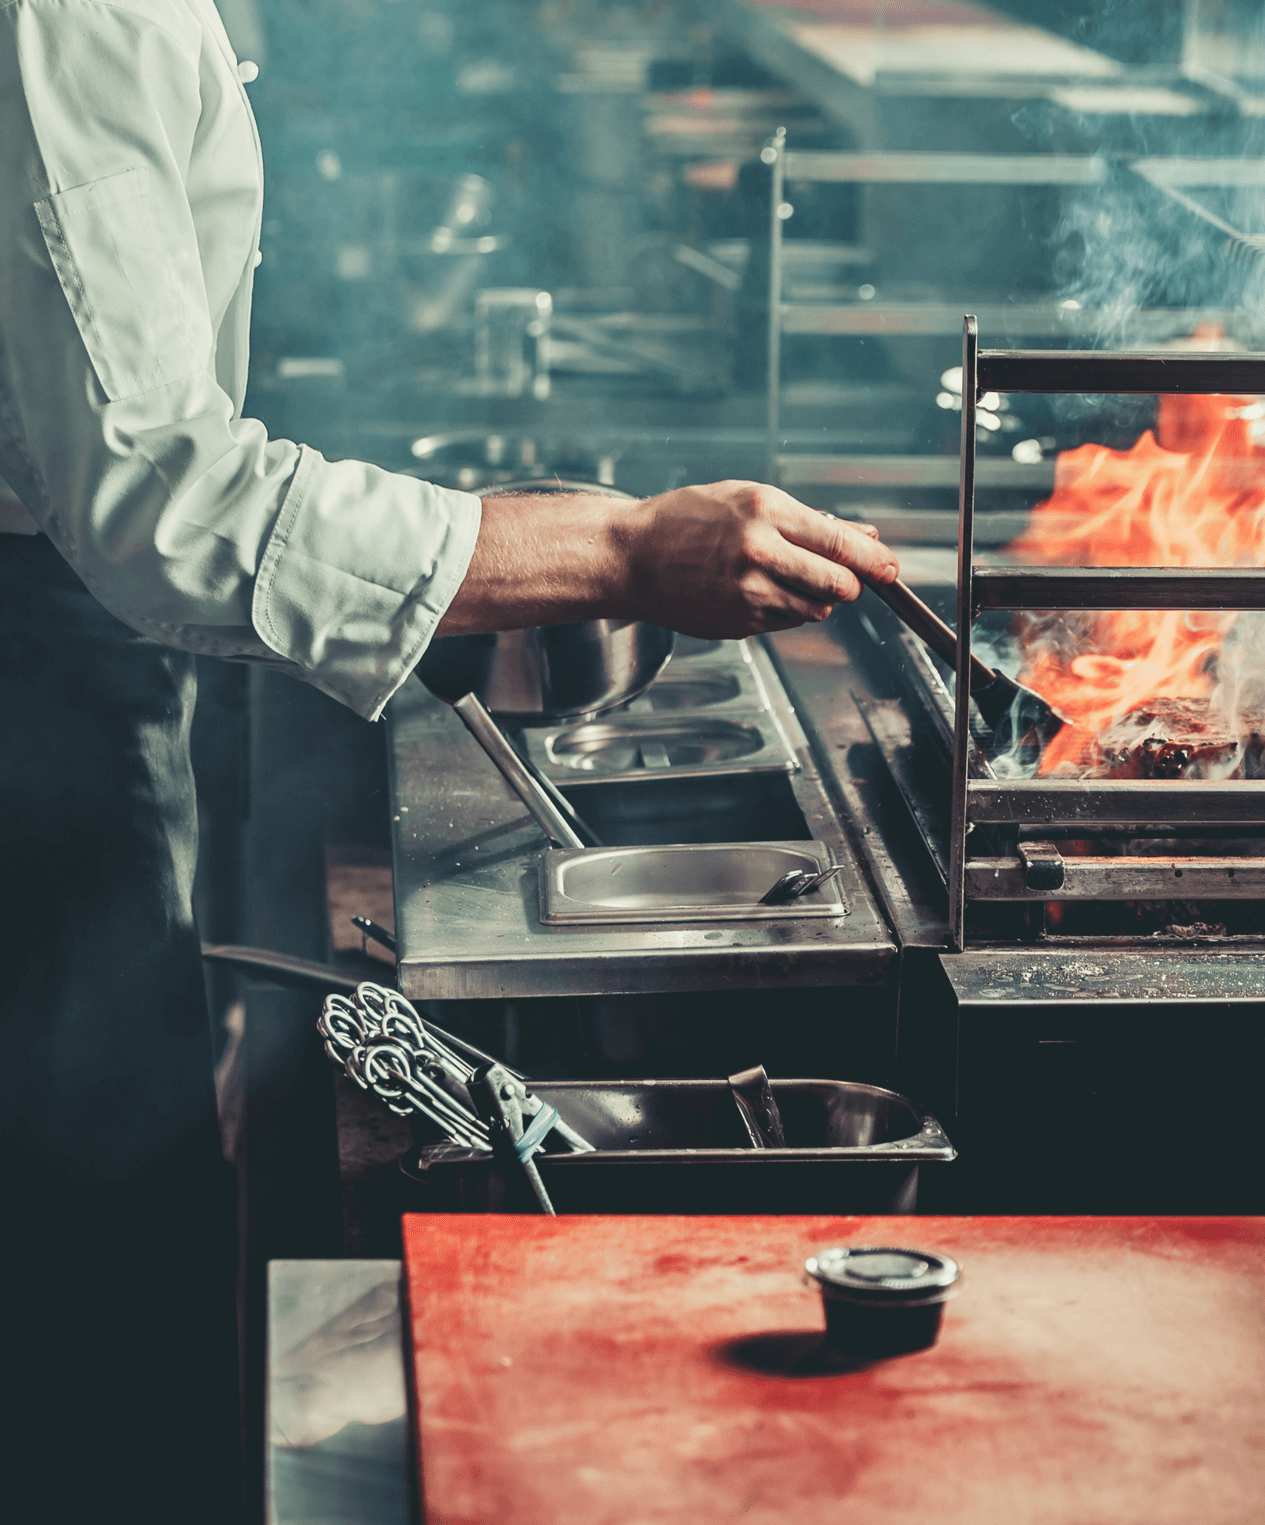 A chef preparing steak in a kitchen with flames shooting up from the grill.